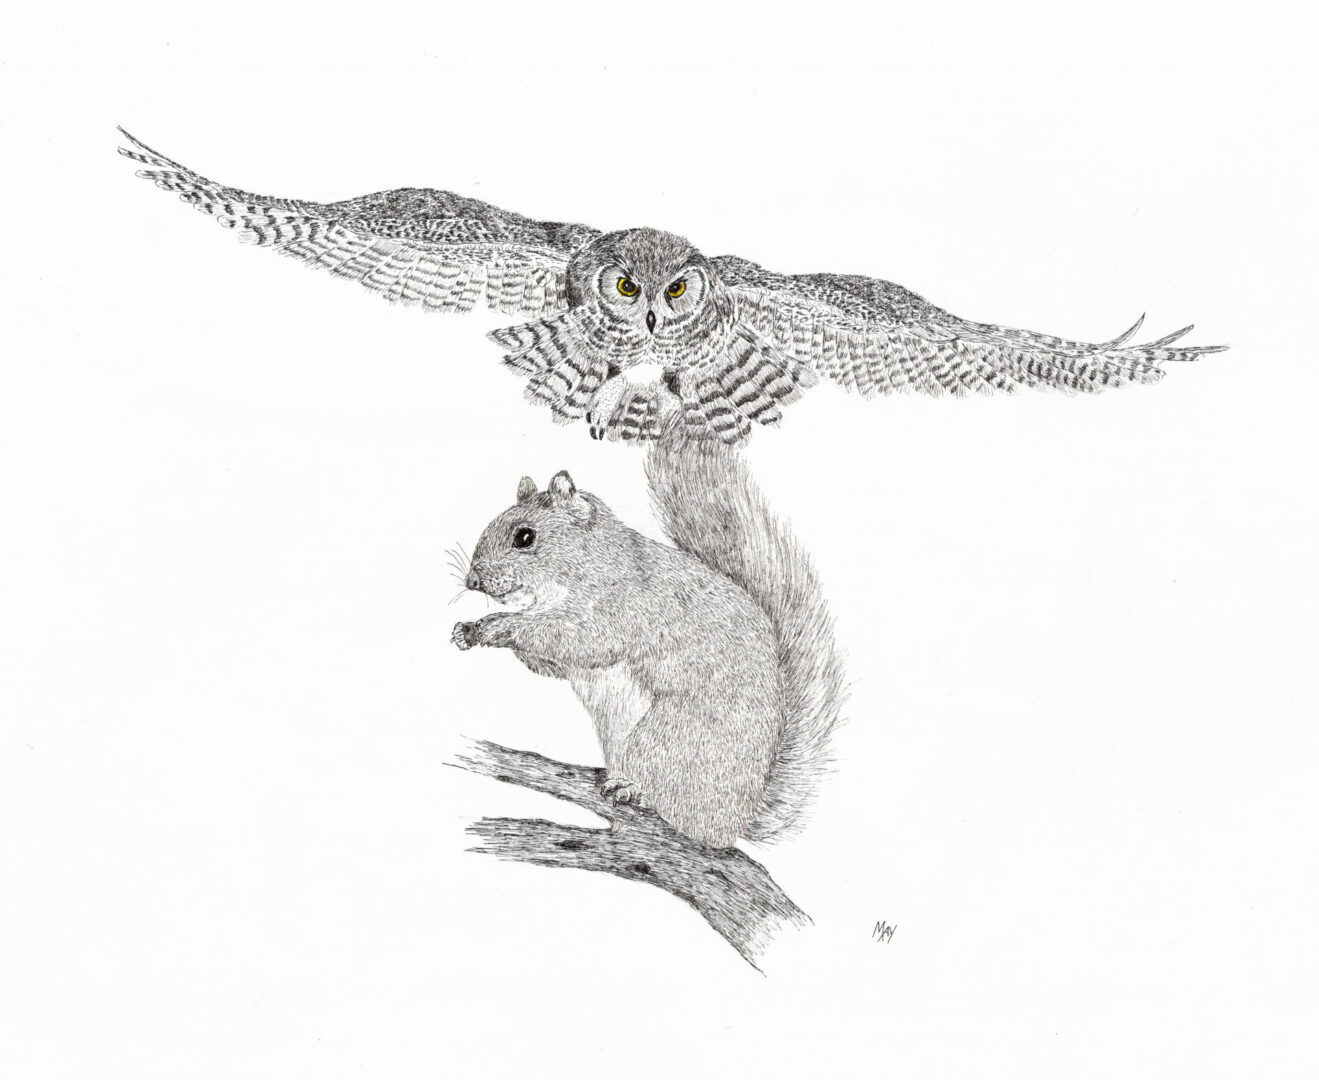 Sketch of an owl about to abduct a small squirrel